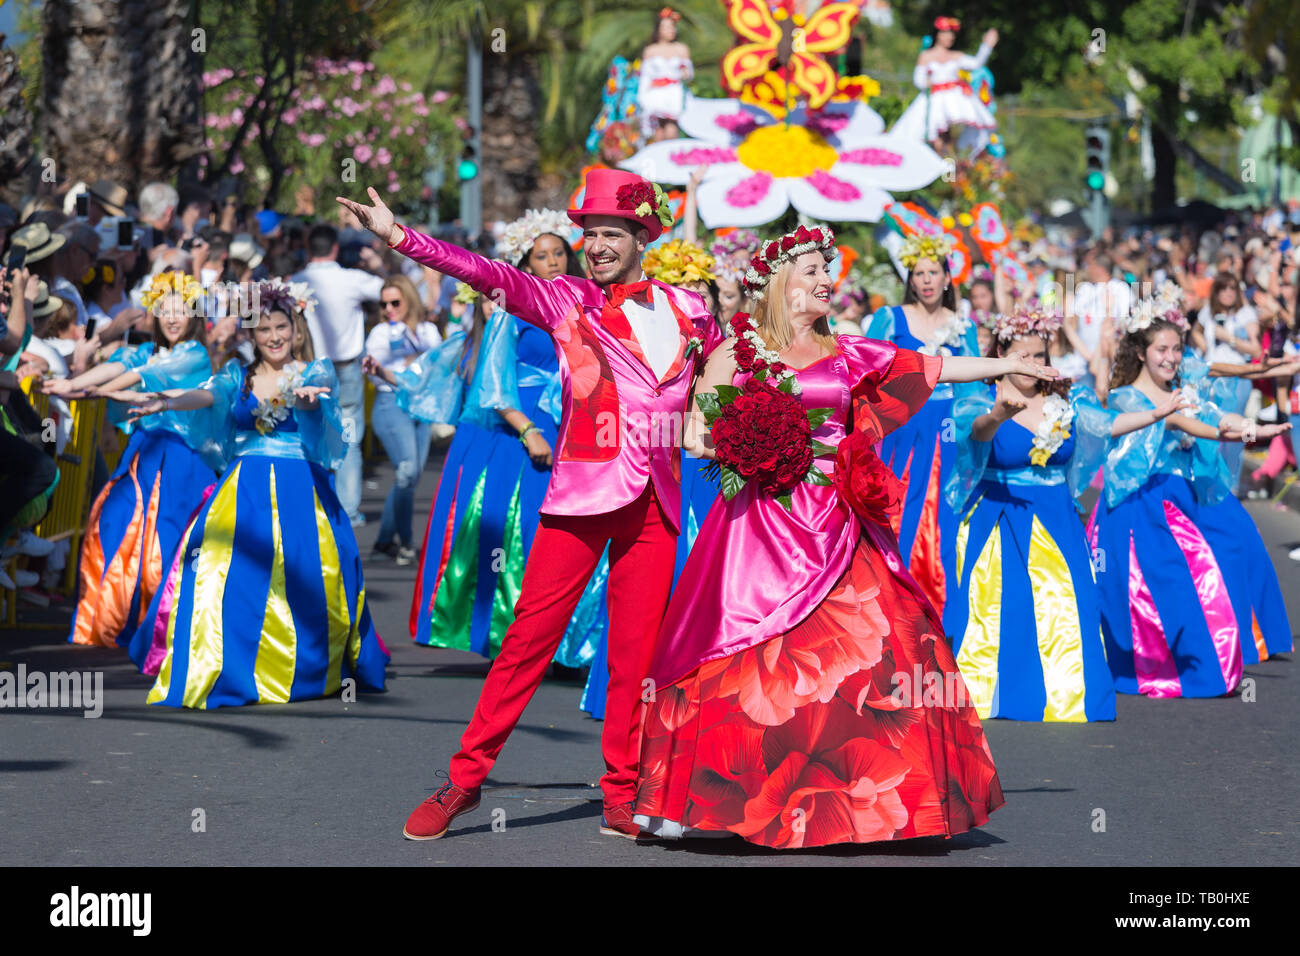 Parade of Madeira Flower Festival or "Festa da flor" in Funchal city, Madeira Island, Portugal, May 2019 Stock Photo